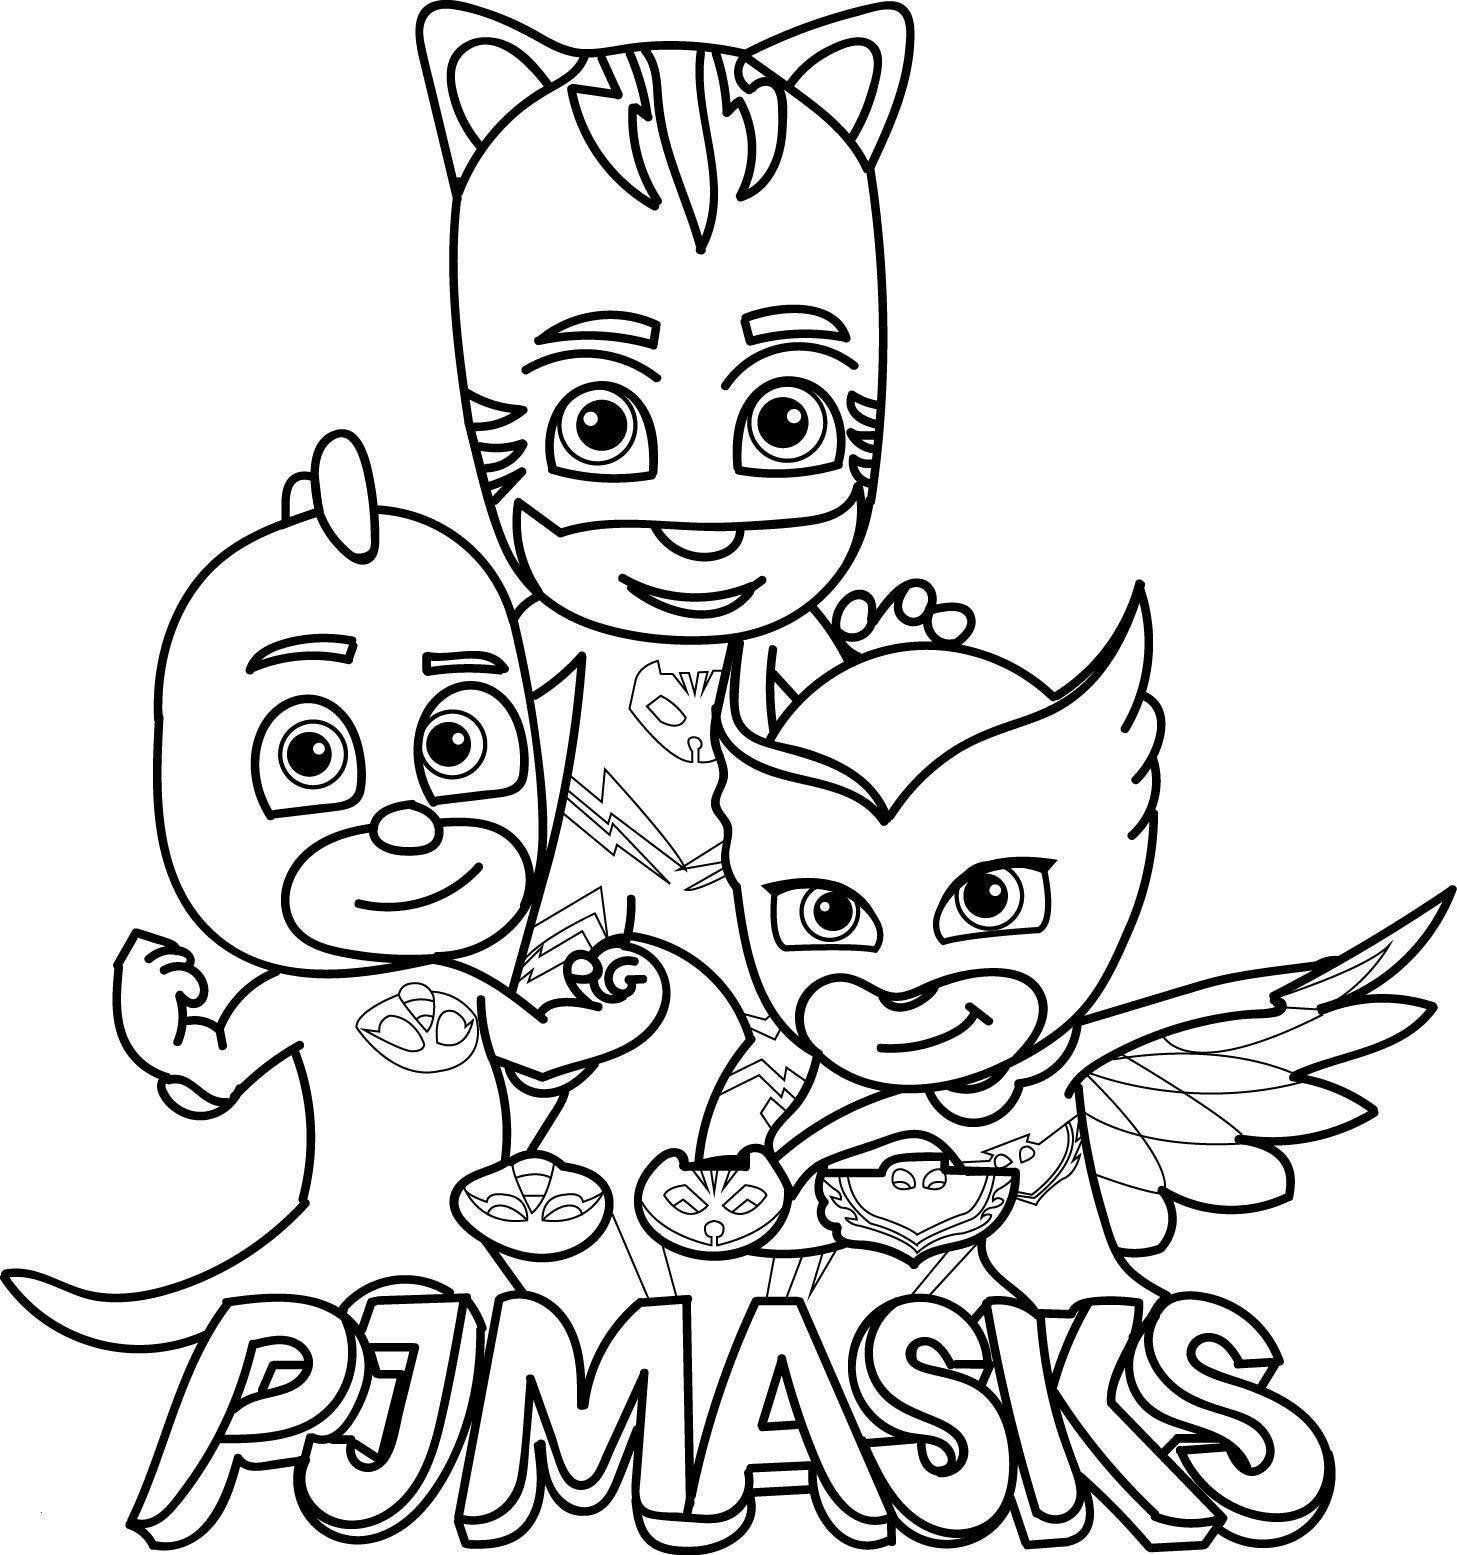 Pin On Unique Coloring Pages Ideas